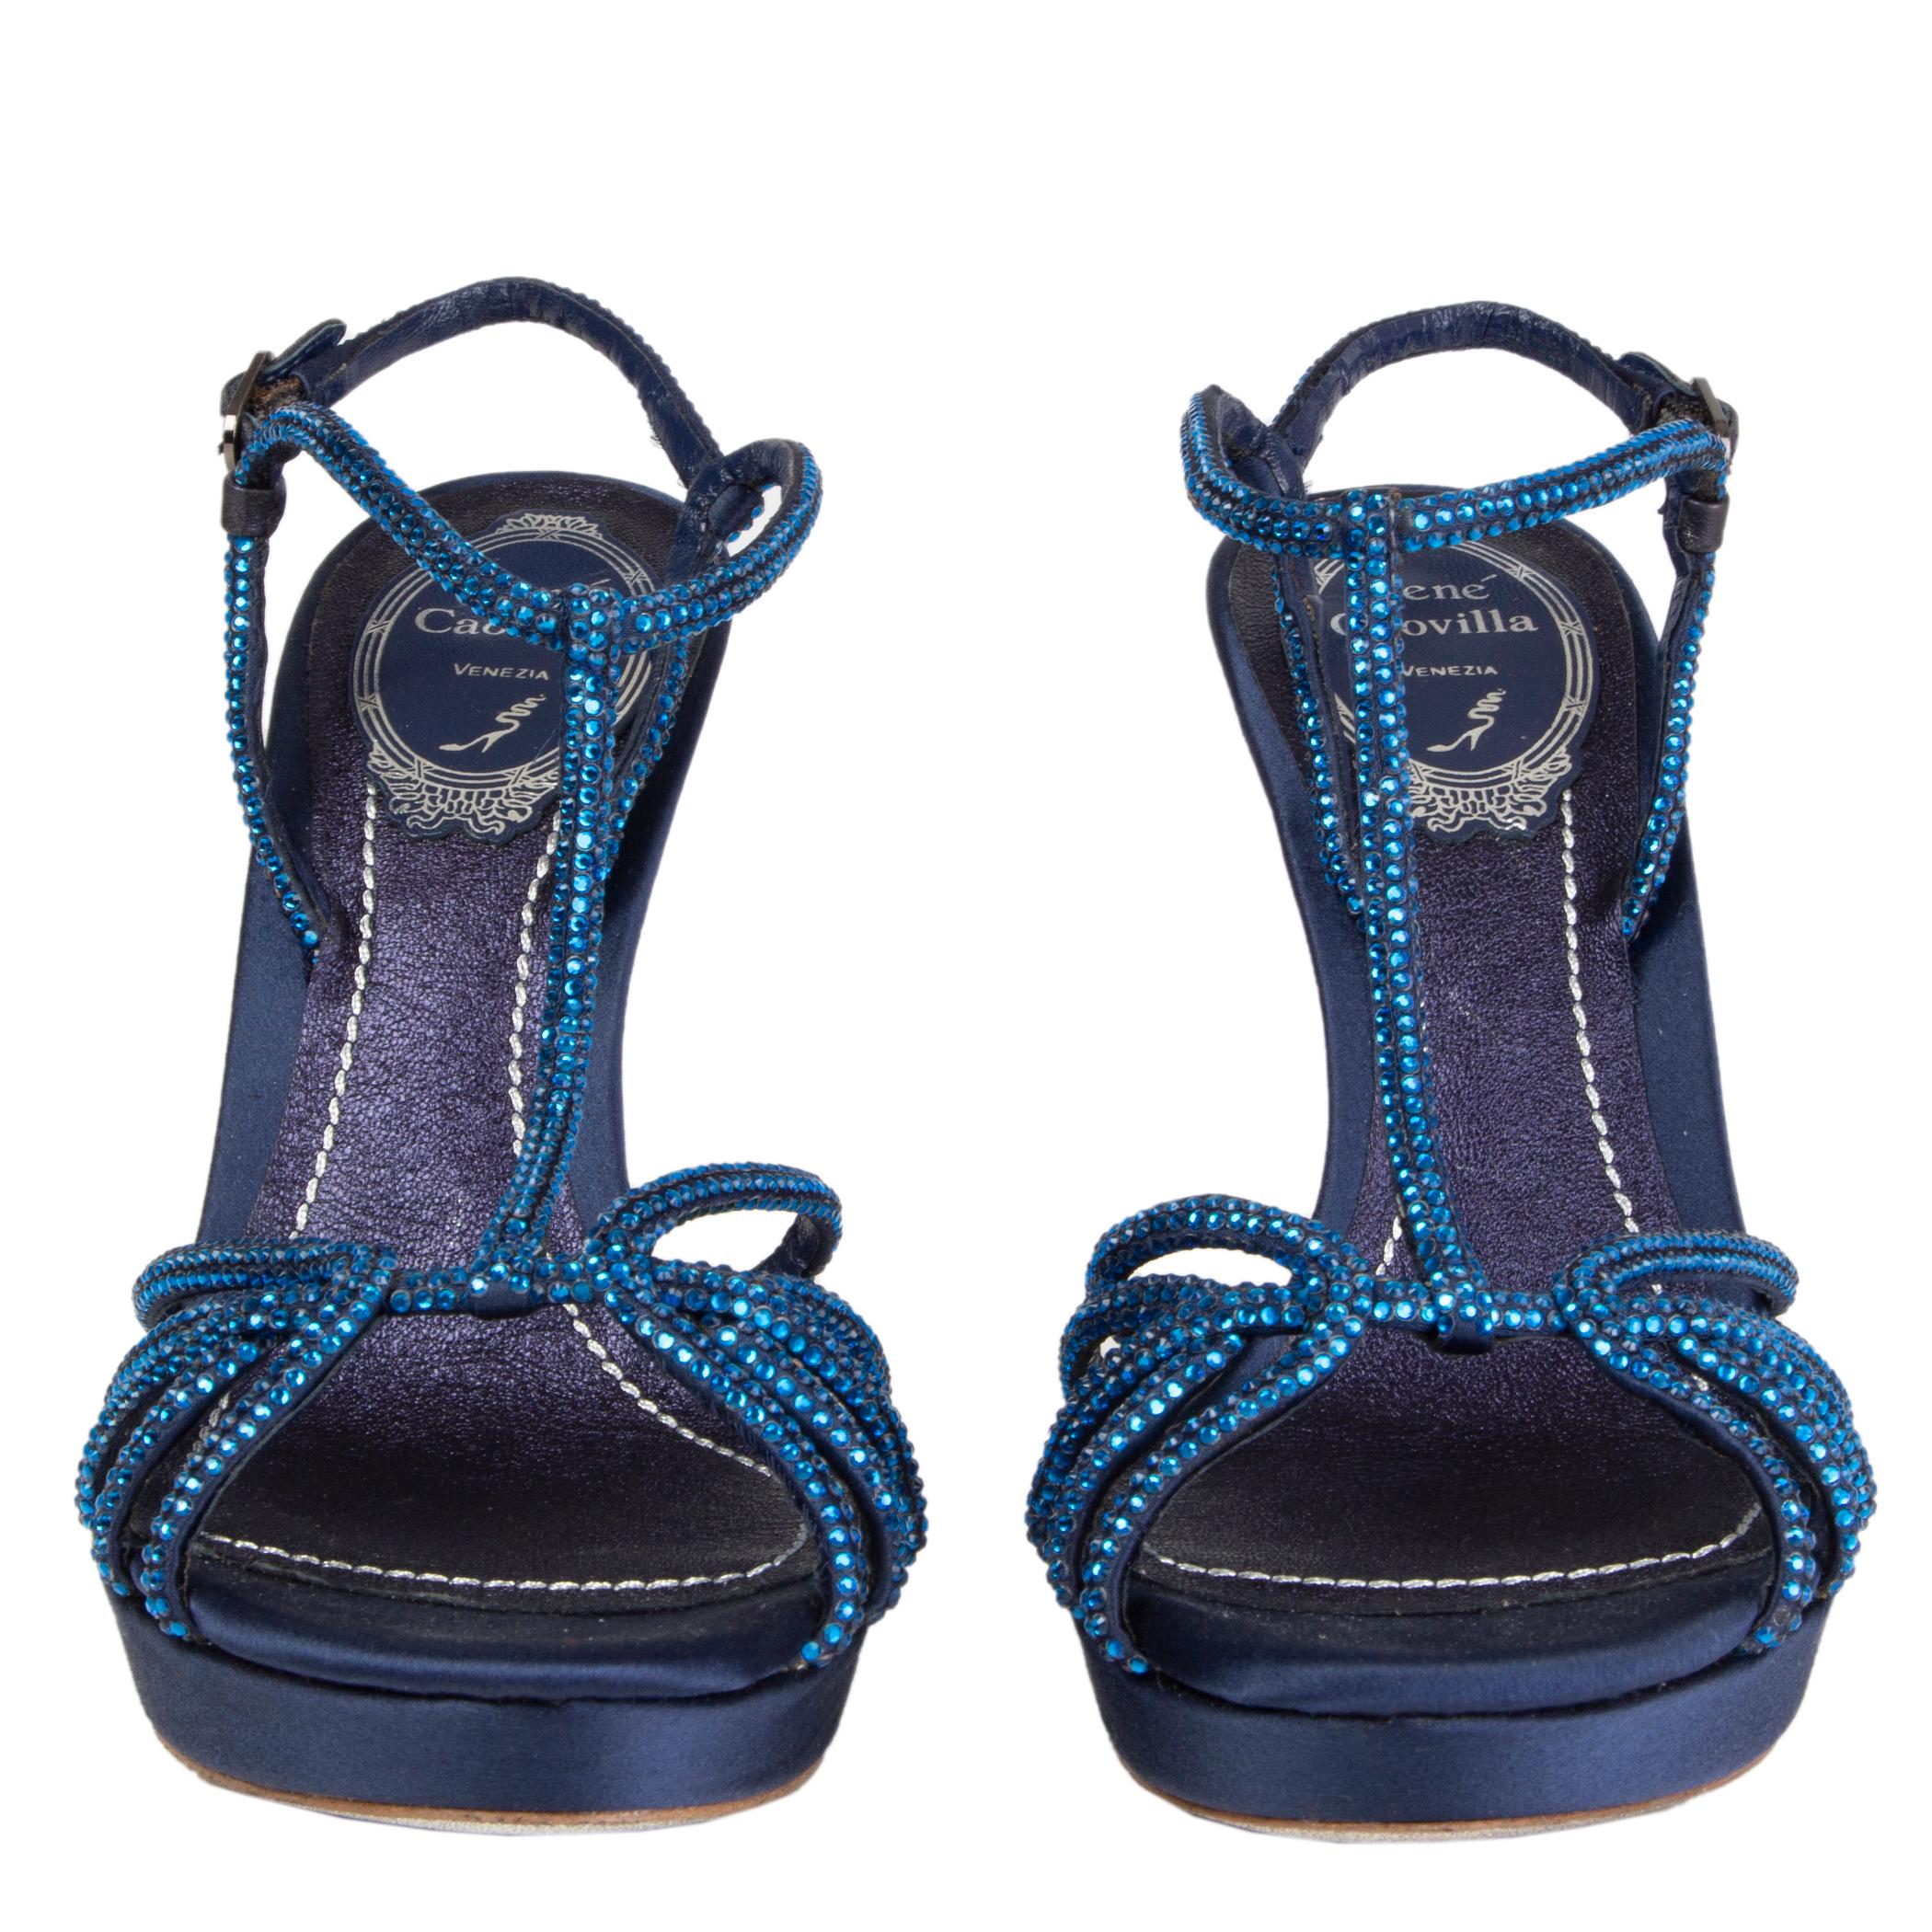 100% authentic René Caovilla platform sandals in midnight blue satin and blue rhinestones. Close with a buckle around ankle. Brand new. 

Measurements
Imprinted Size	36
Shoe Size	36
Inside Sole	23cm (9in)
Width	7.5cm (2.9in)
Heel	12cm